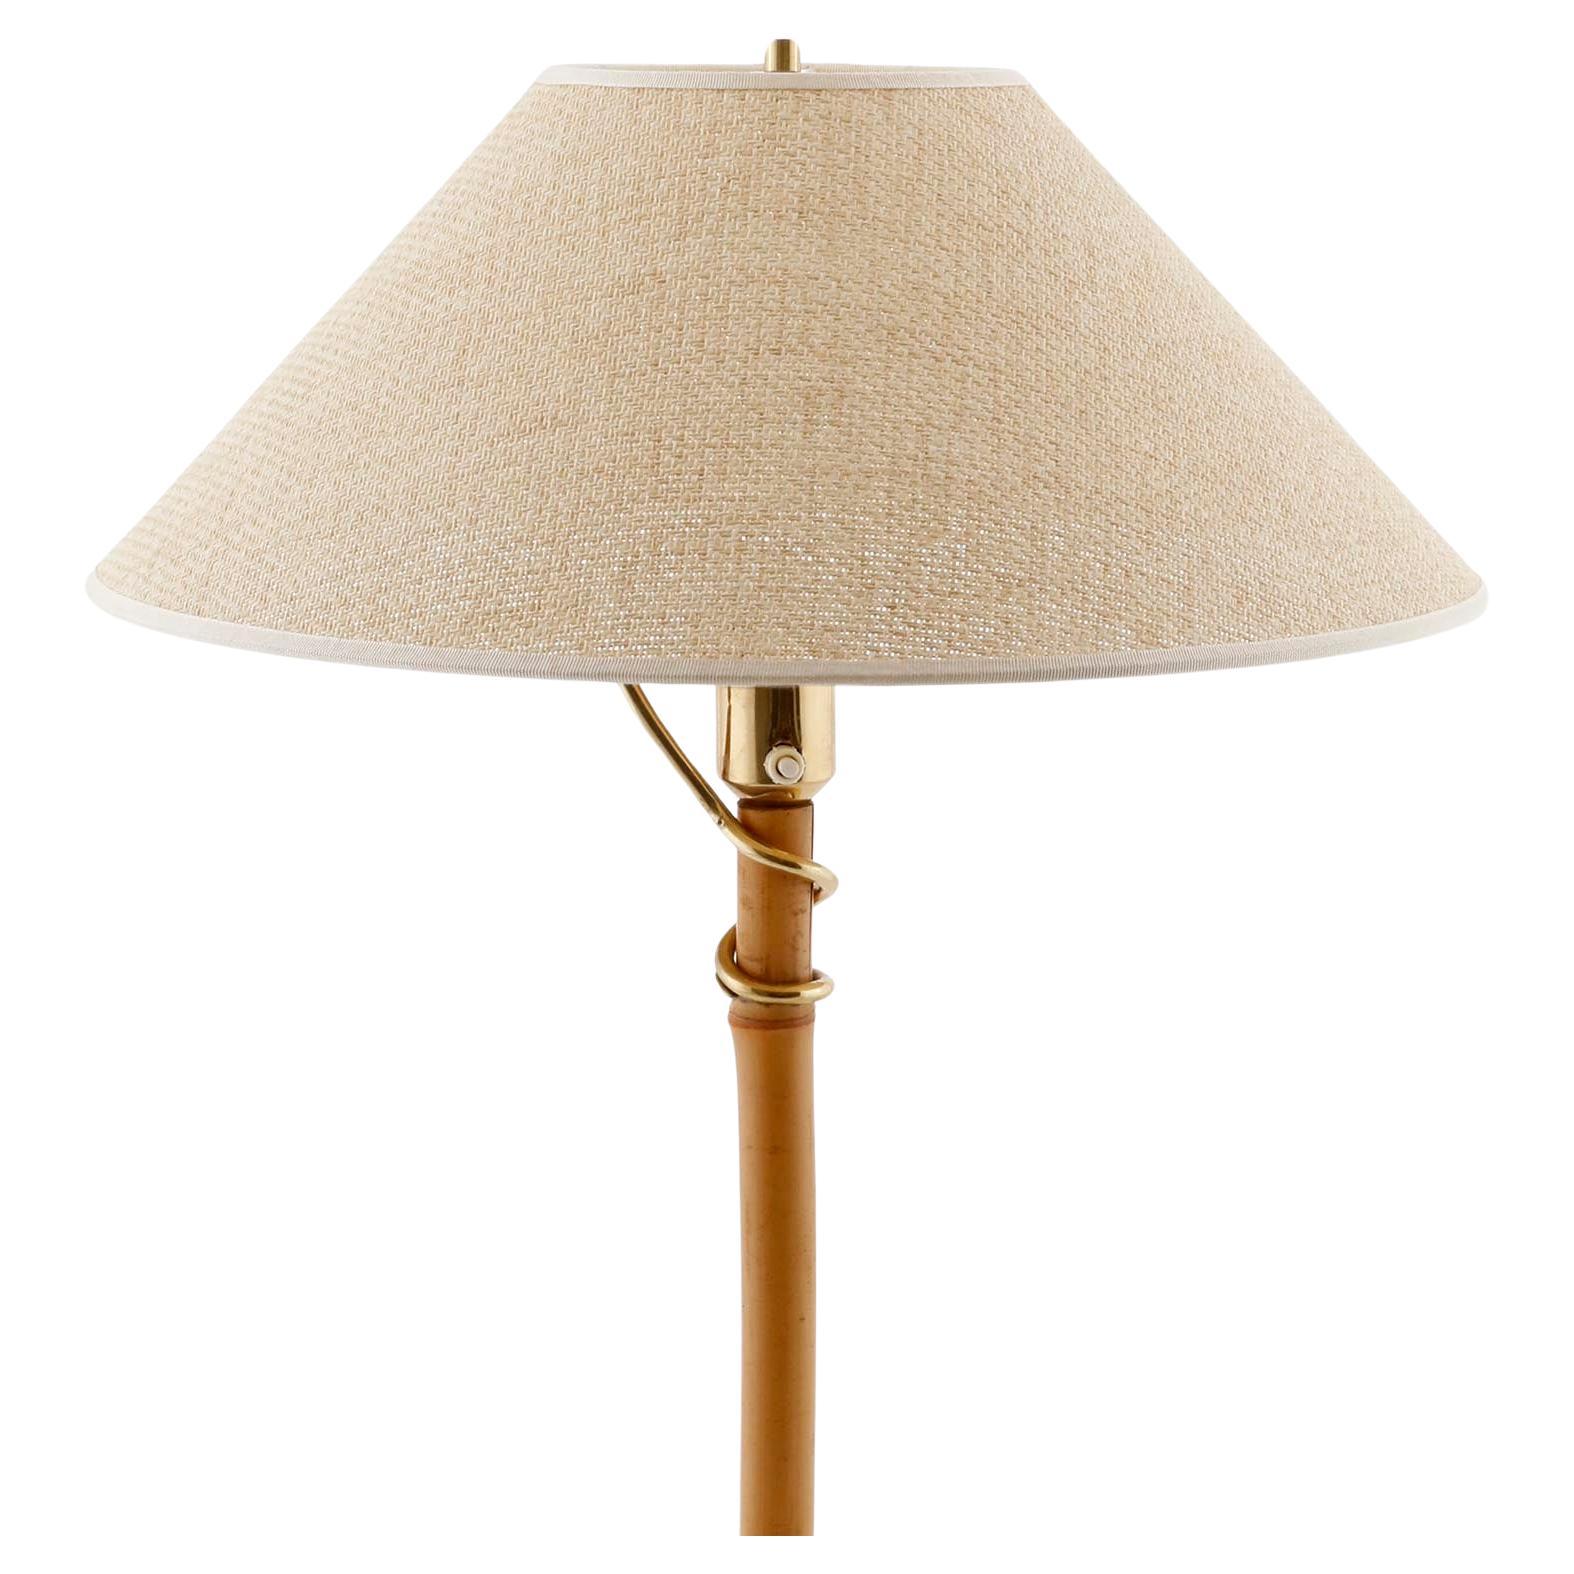 Polished Large Table Lamp, Brass Bamboo Cane Wicker Shade, attr. J.T. Kalmar, 1950s For Sale